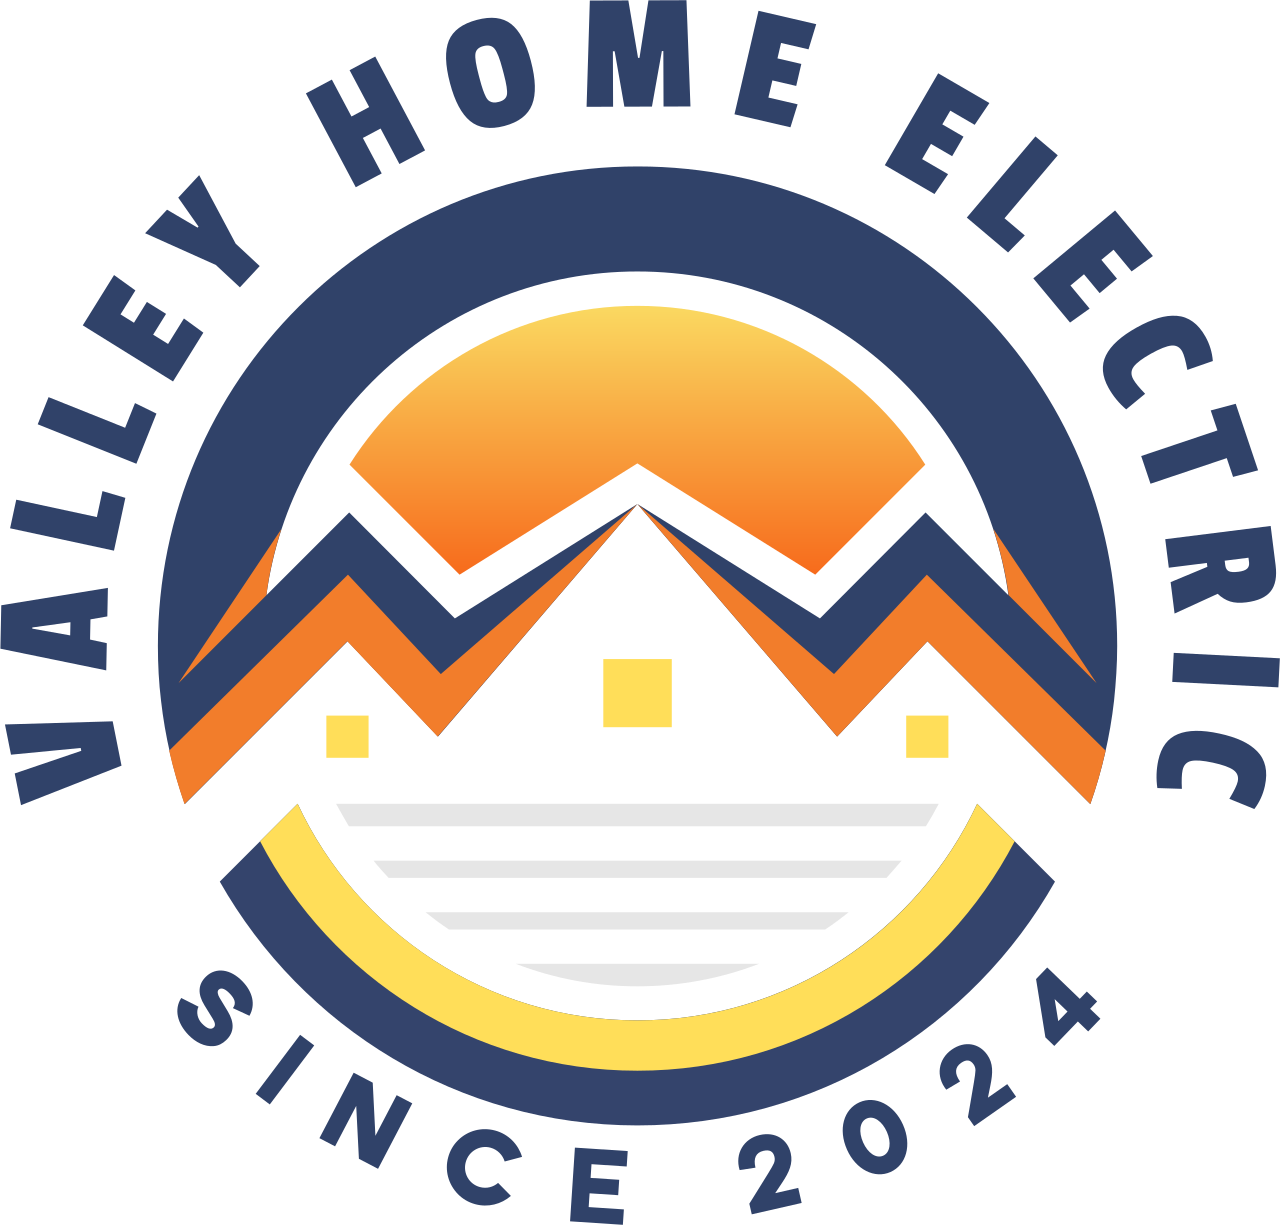 Valley Home Electric's logo